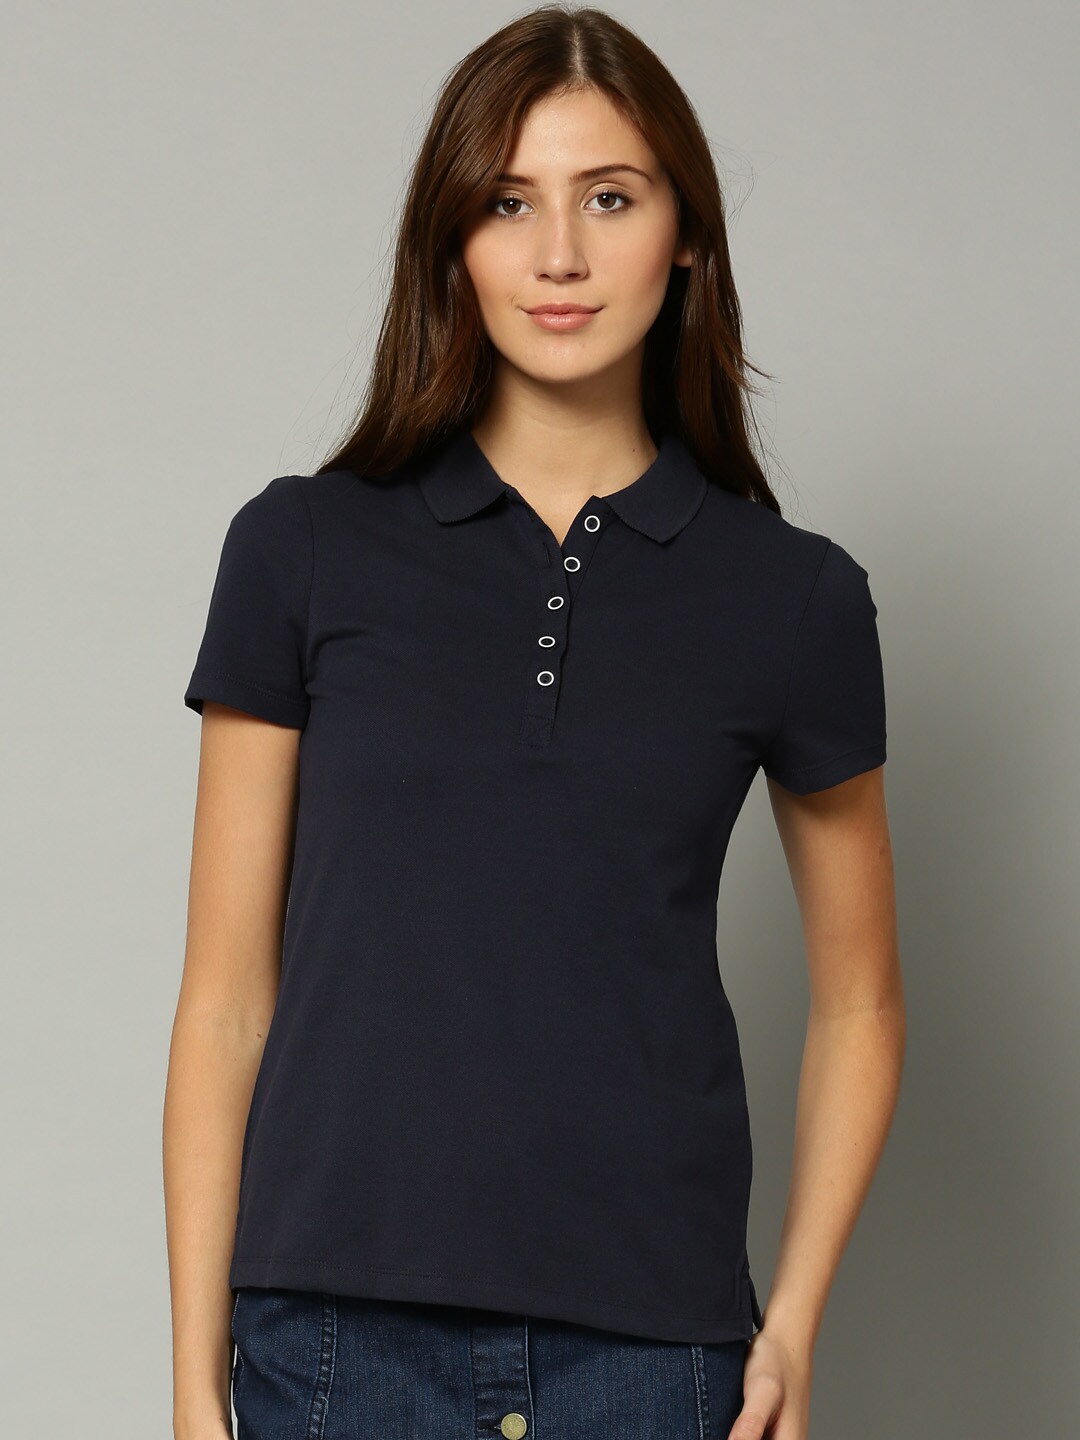 marks and spencer ladies polo shirts